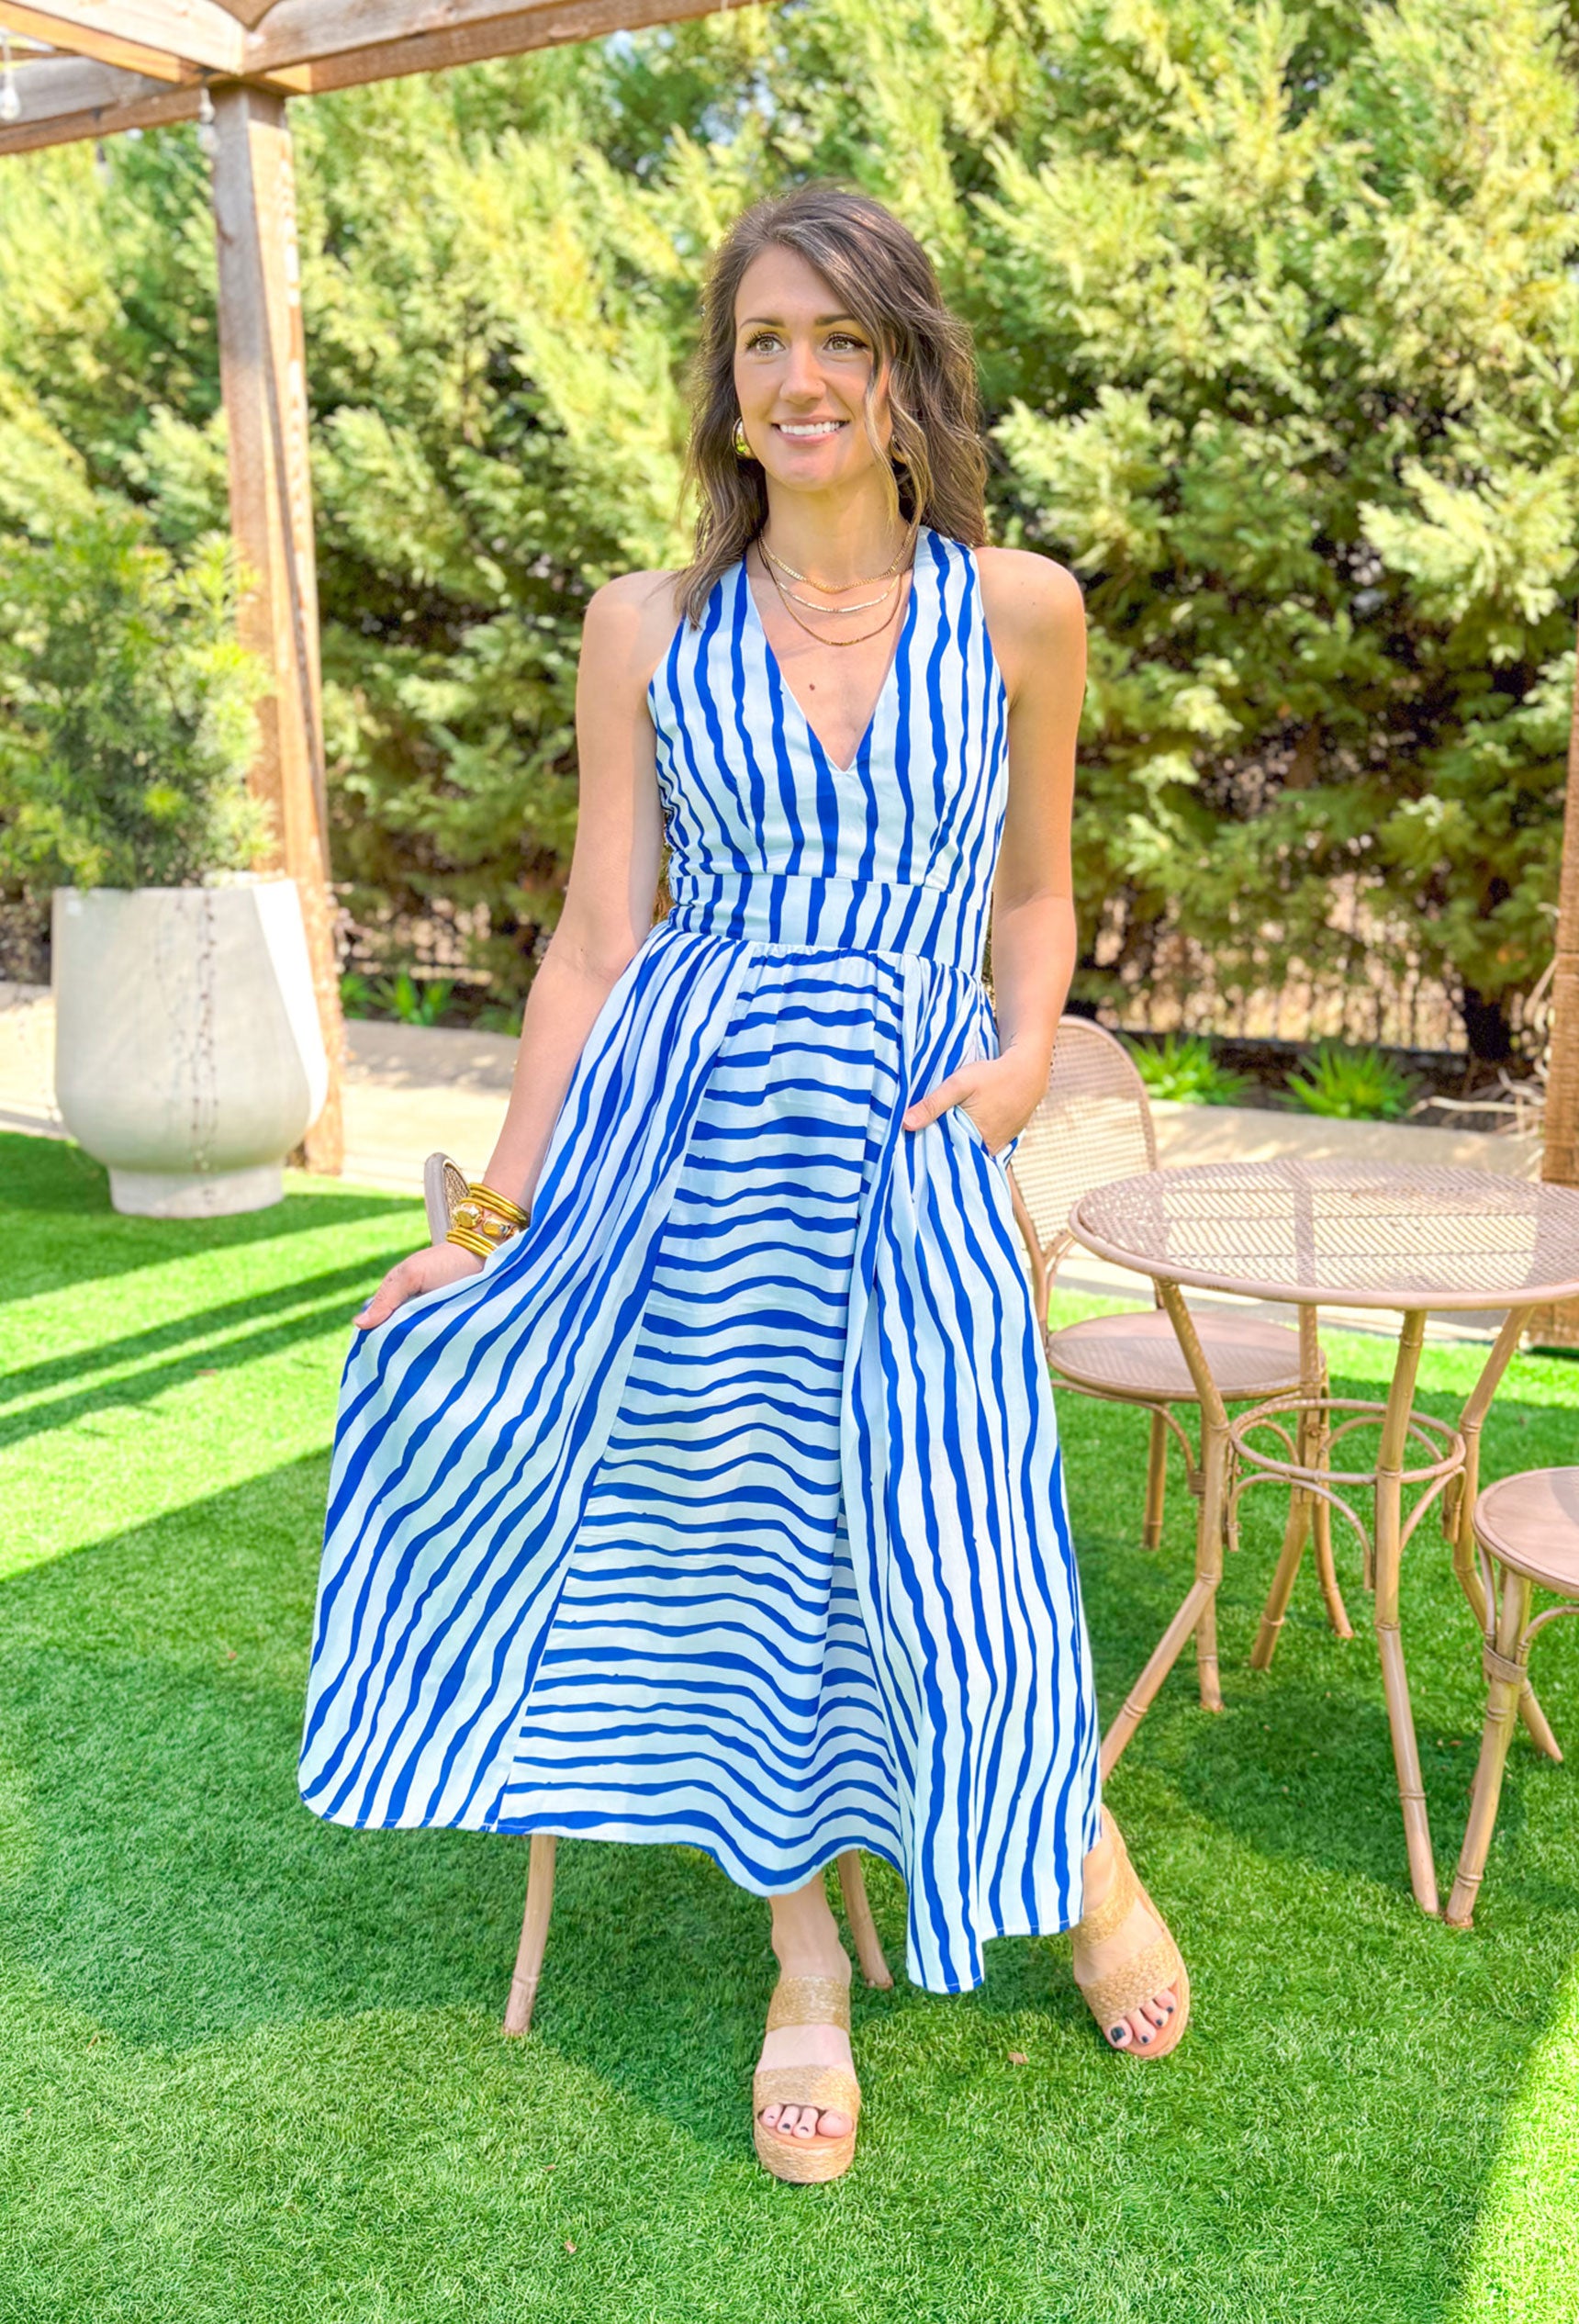 Island In The Sun Midi Dress, light blue and royal blue vertical and horizontal striped sleeveless dress with deep v-neck and pockets